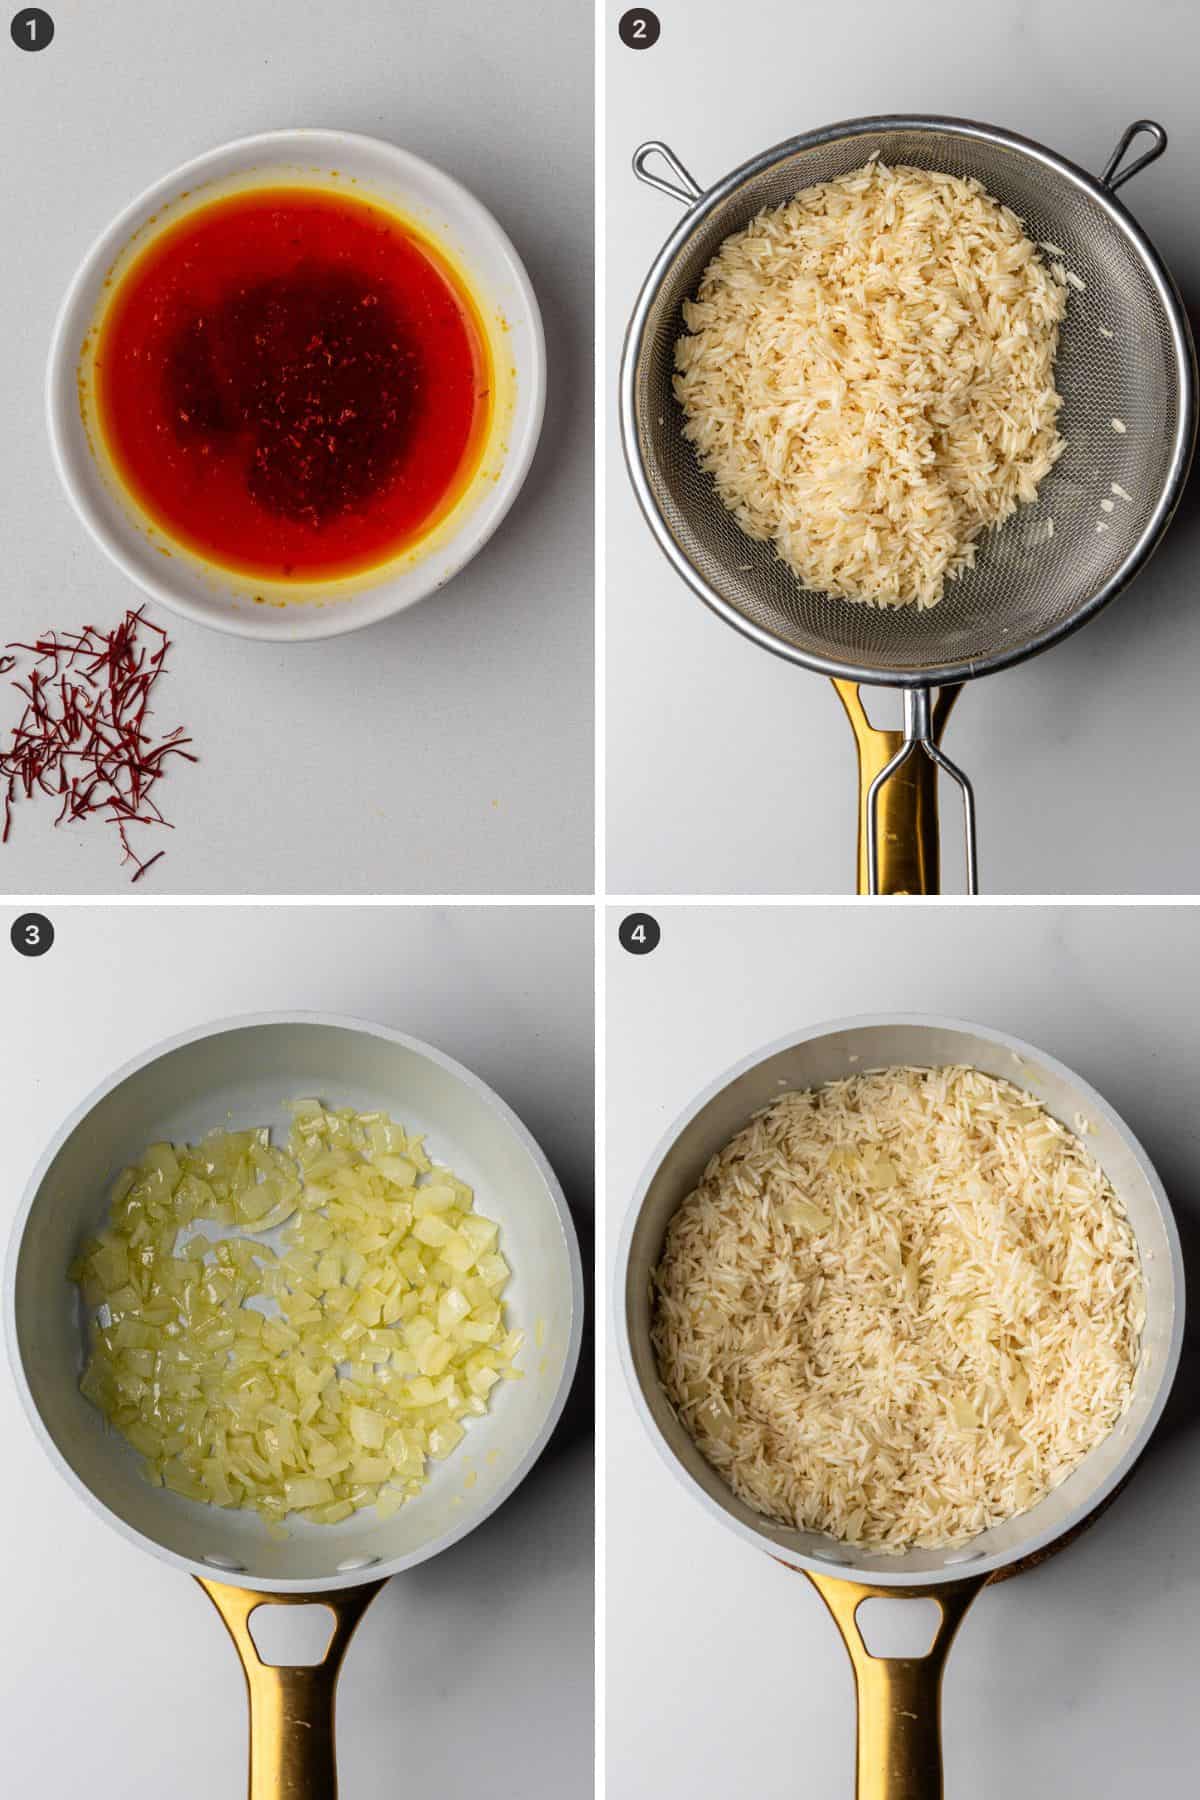 Steps on how to prepare rice